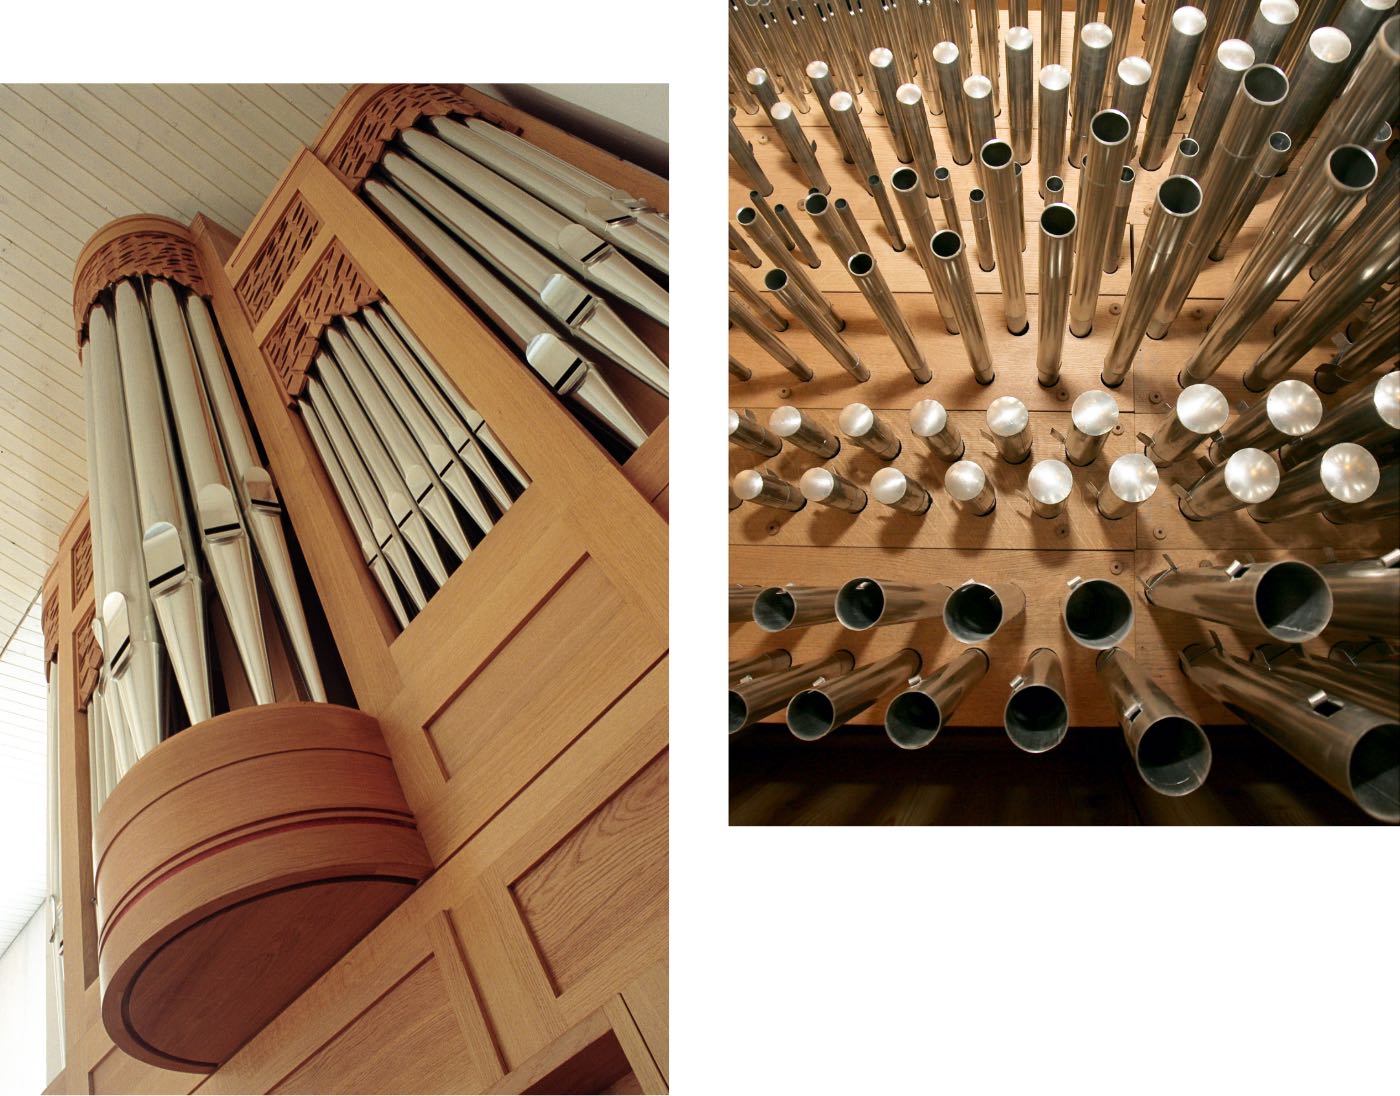  The history of the Muhleisen organ manufacture